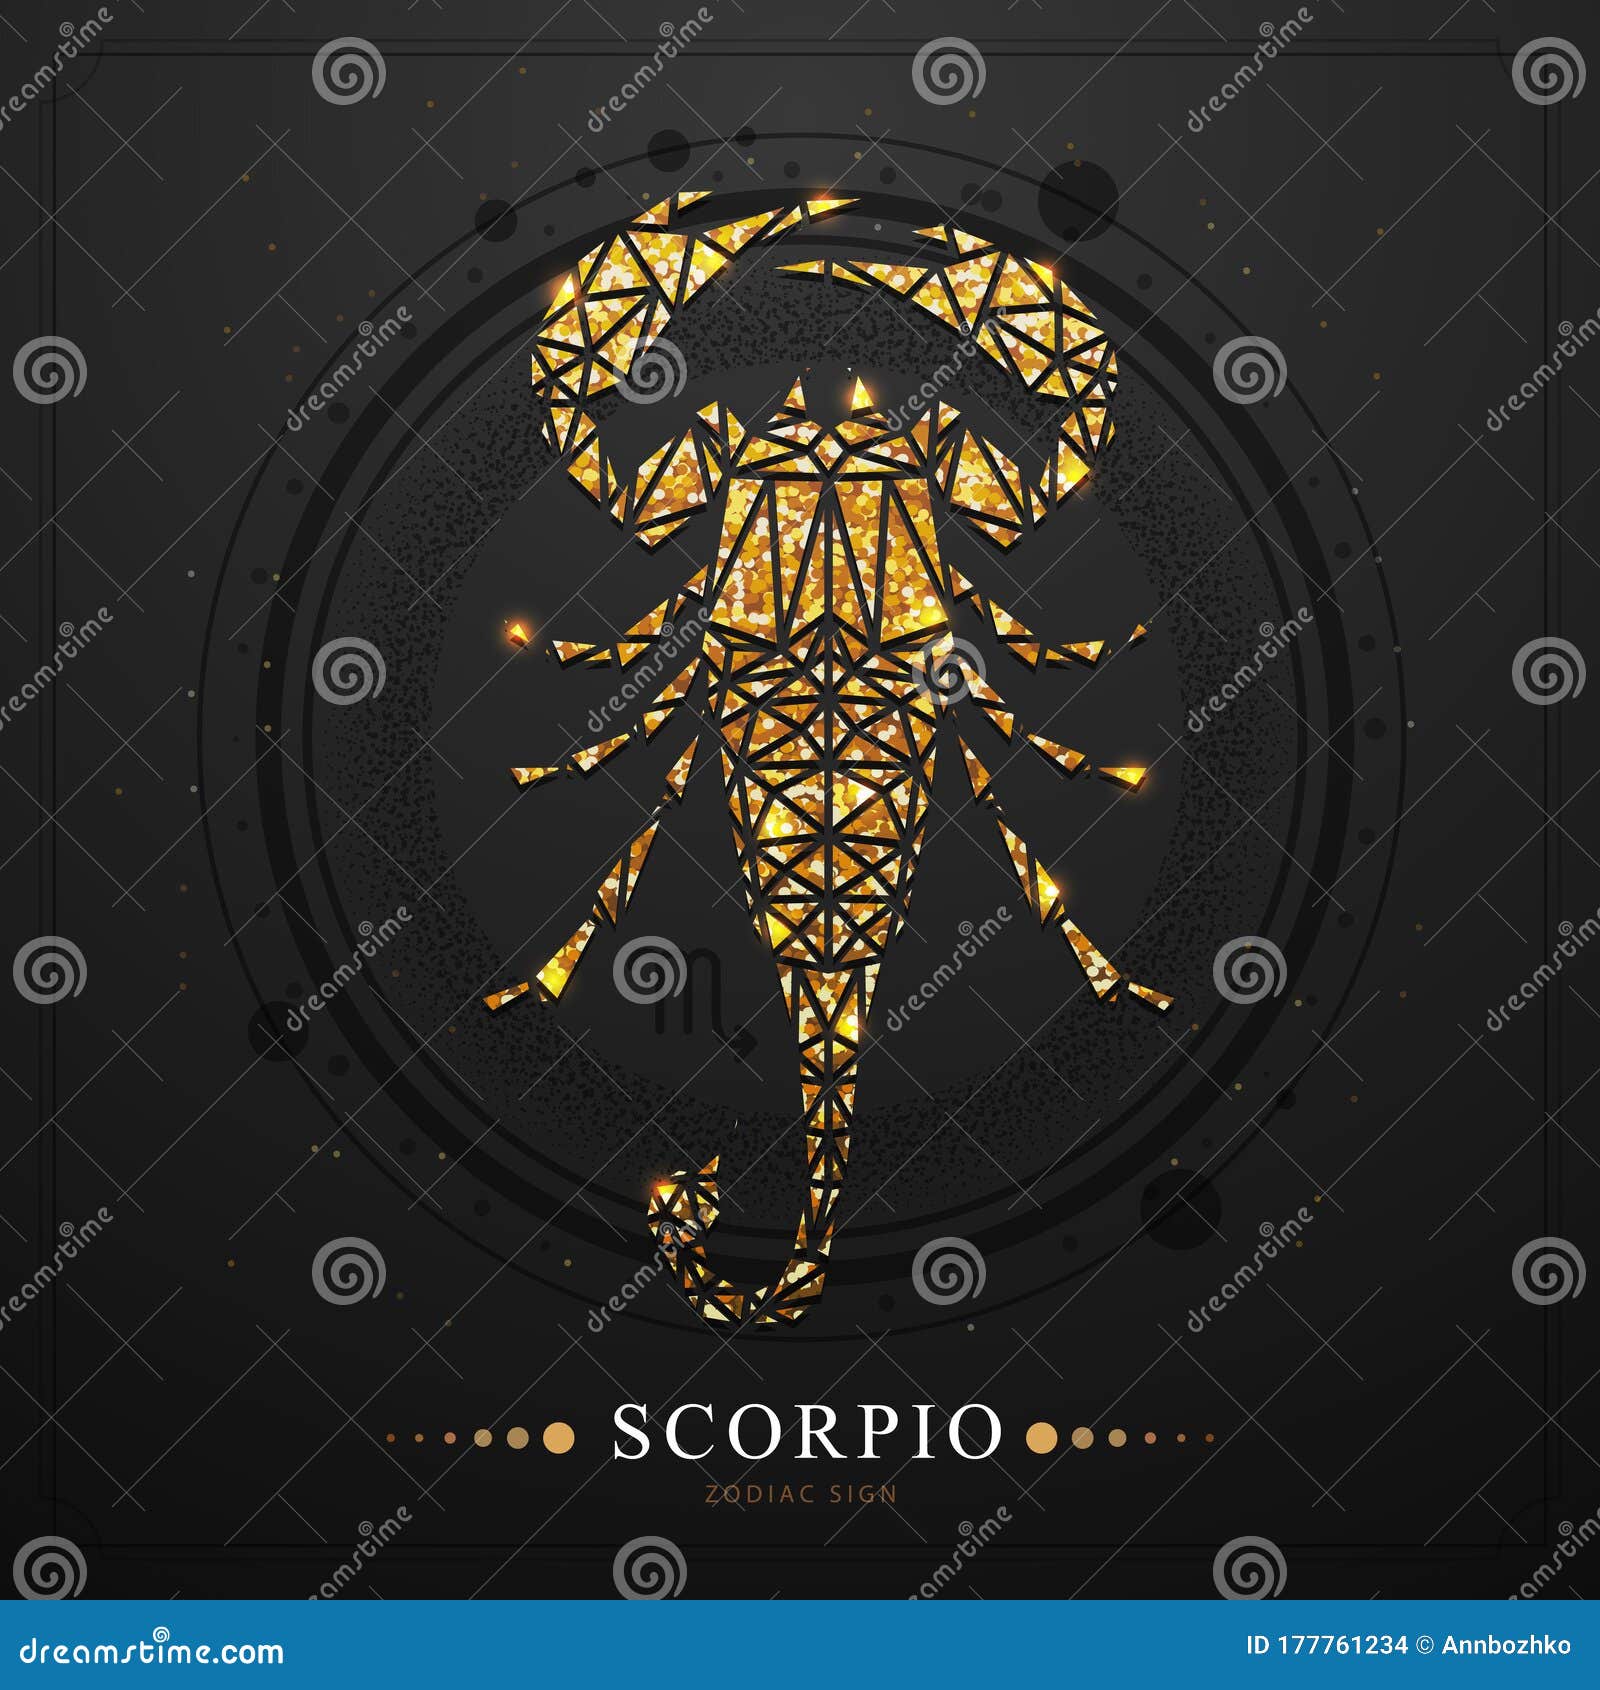 Modern Magic Witchcraft Card with Astrology Golden Scorpio Zodiac Sign ...